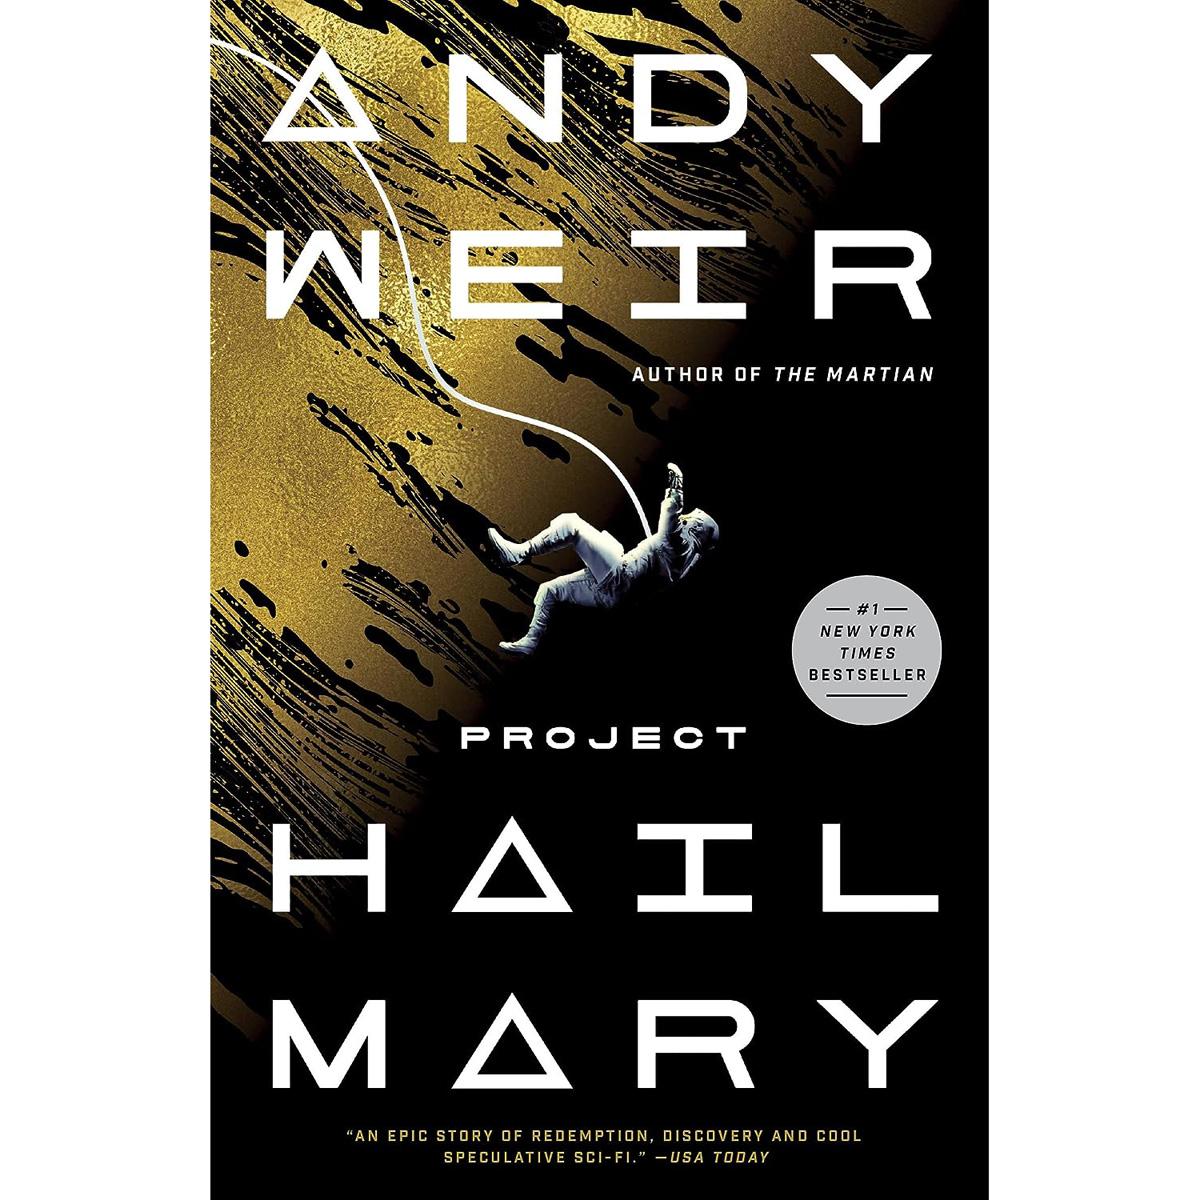 Project Hail Mary by Andy Weir eBook for $2.99